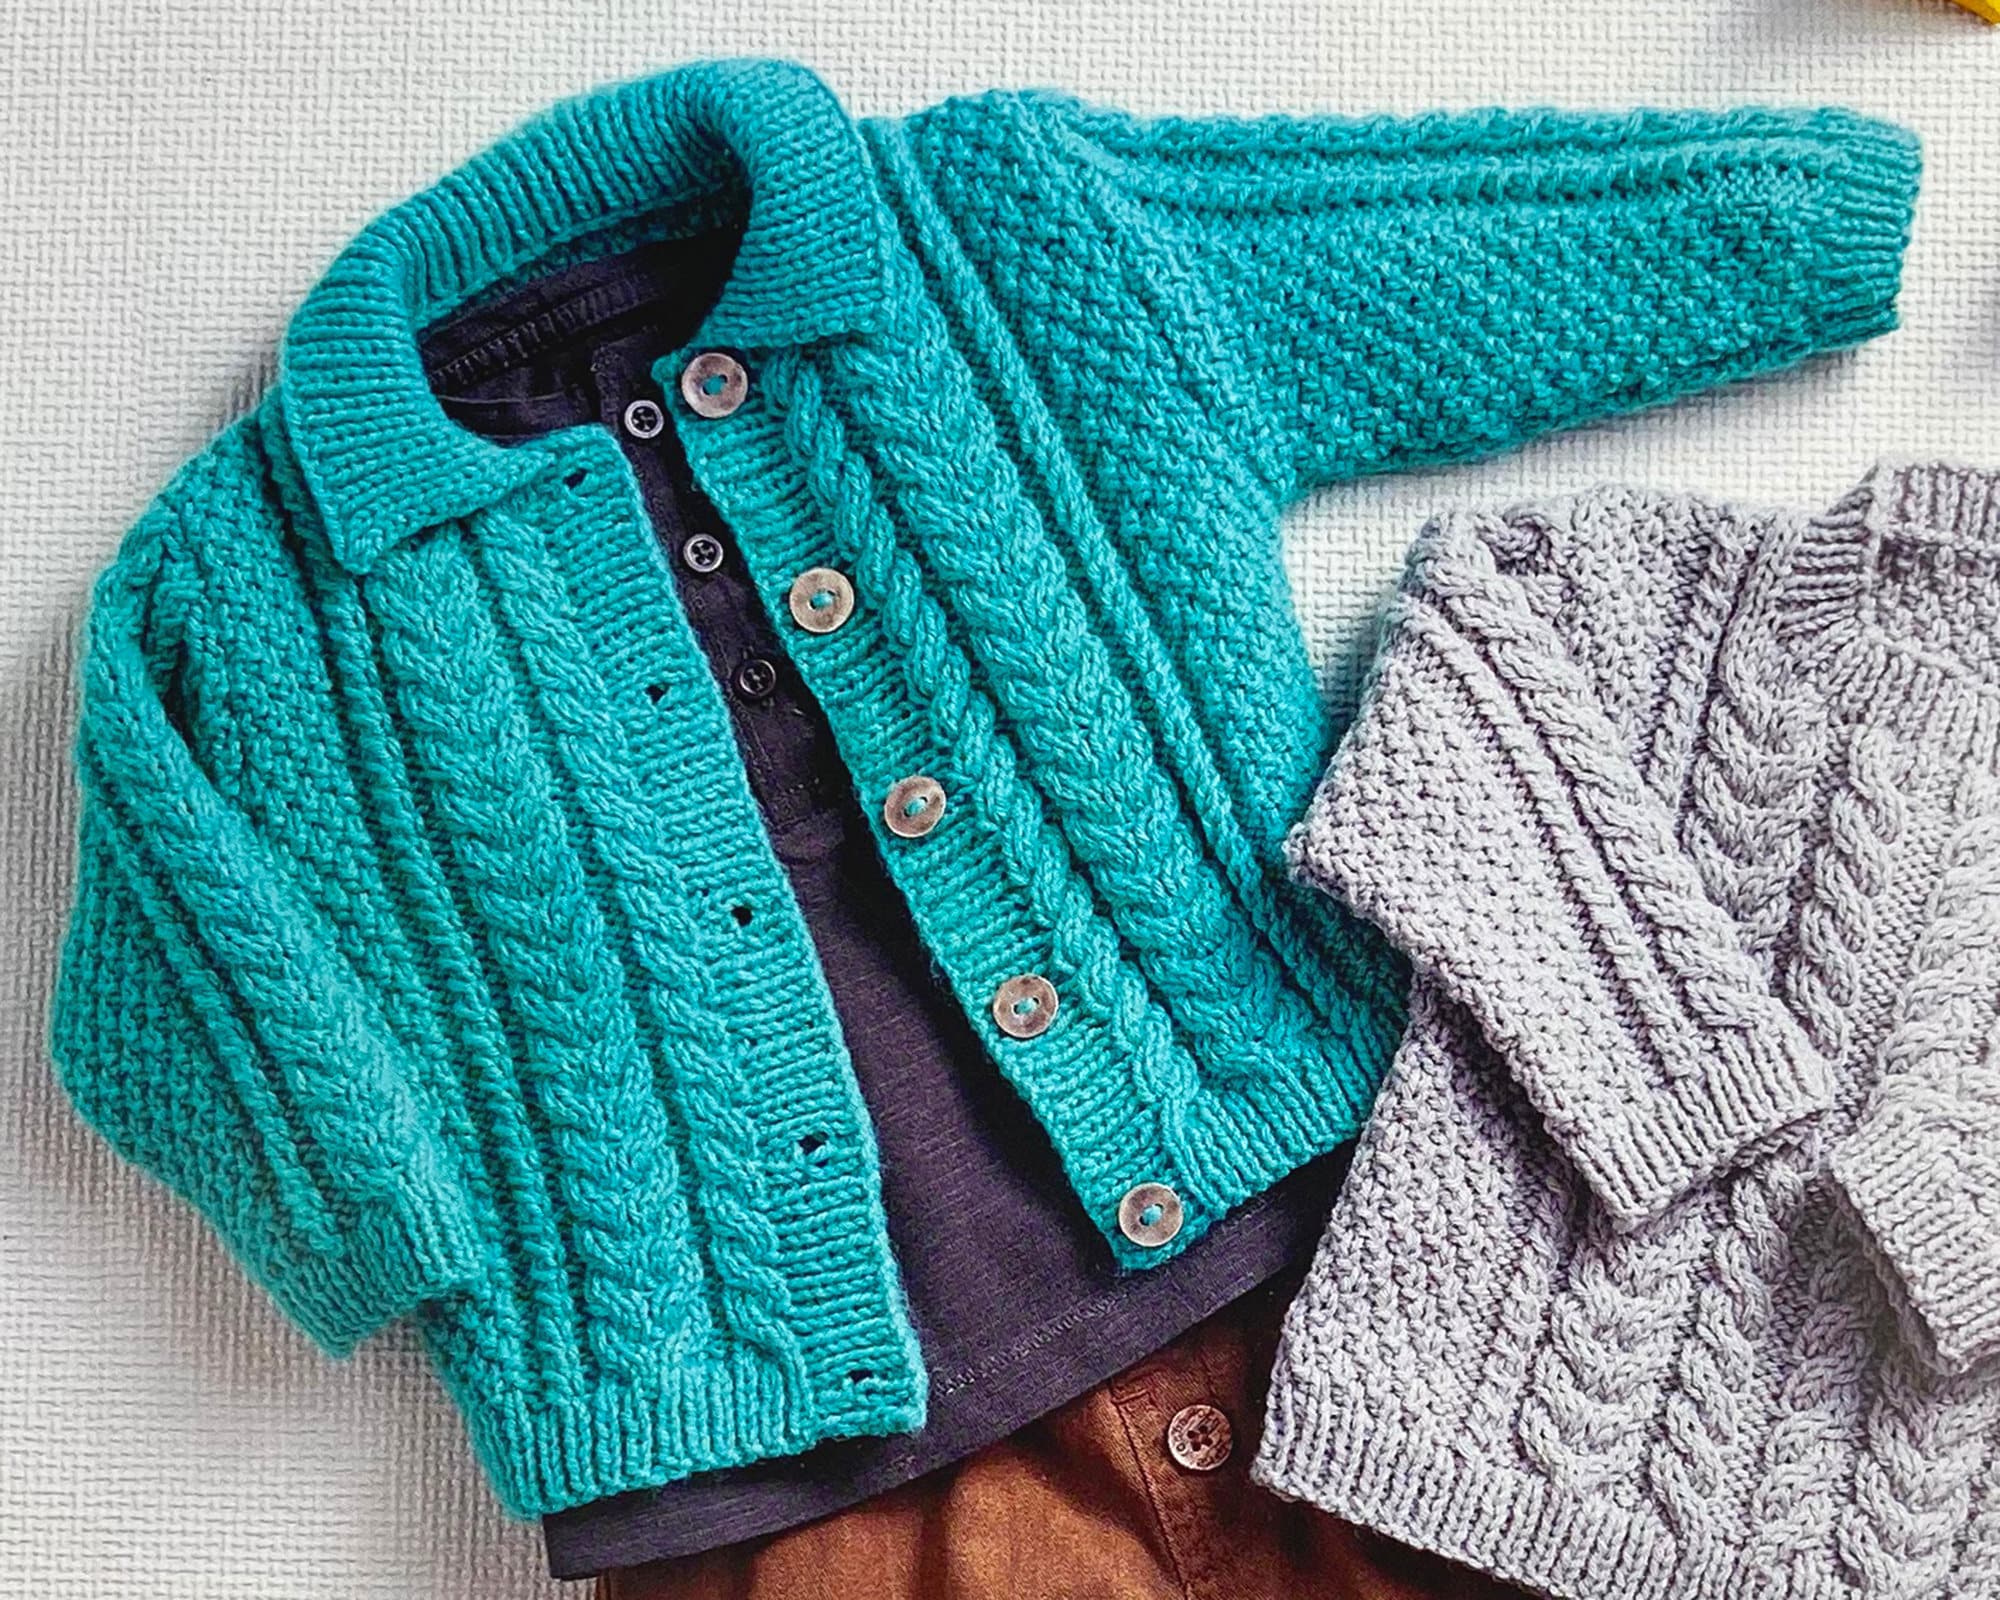 Knitting Pattern: Cardigans and Sweater in Sirdar Snuggly DK - Etsy UK